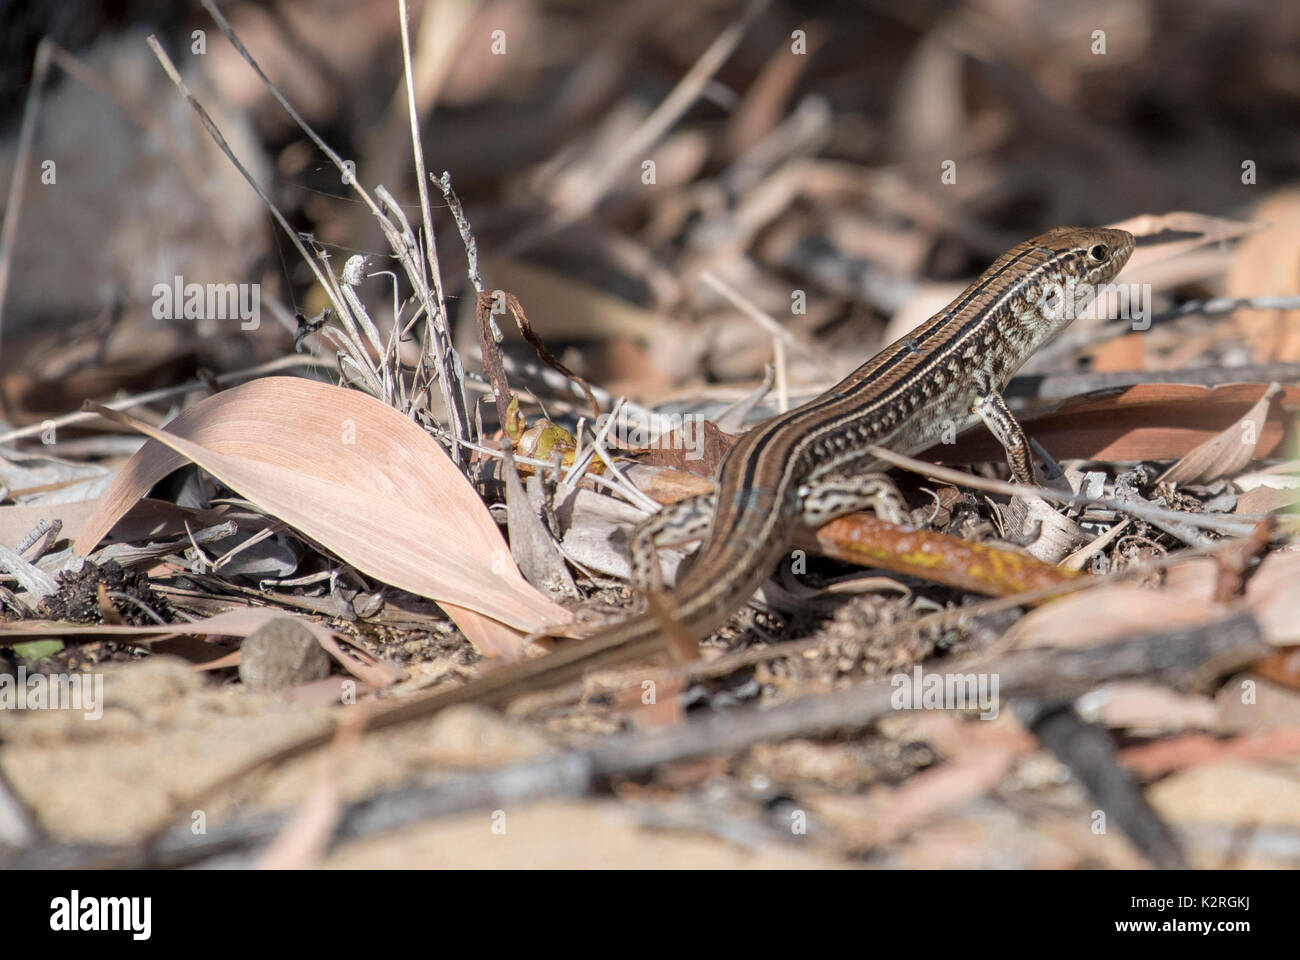 Spalding's Striped Skink and a clear view of the ear opening. Stock Photo